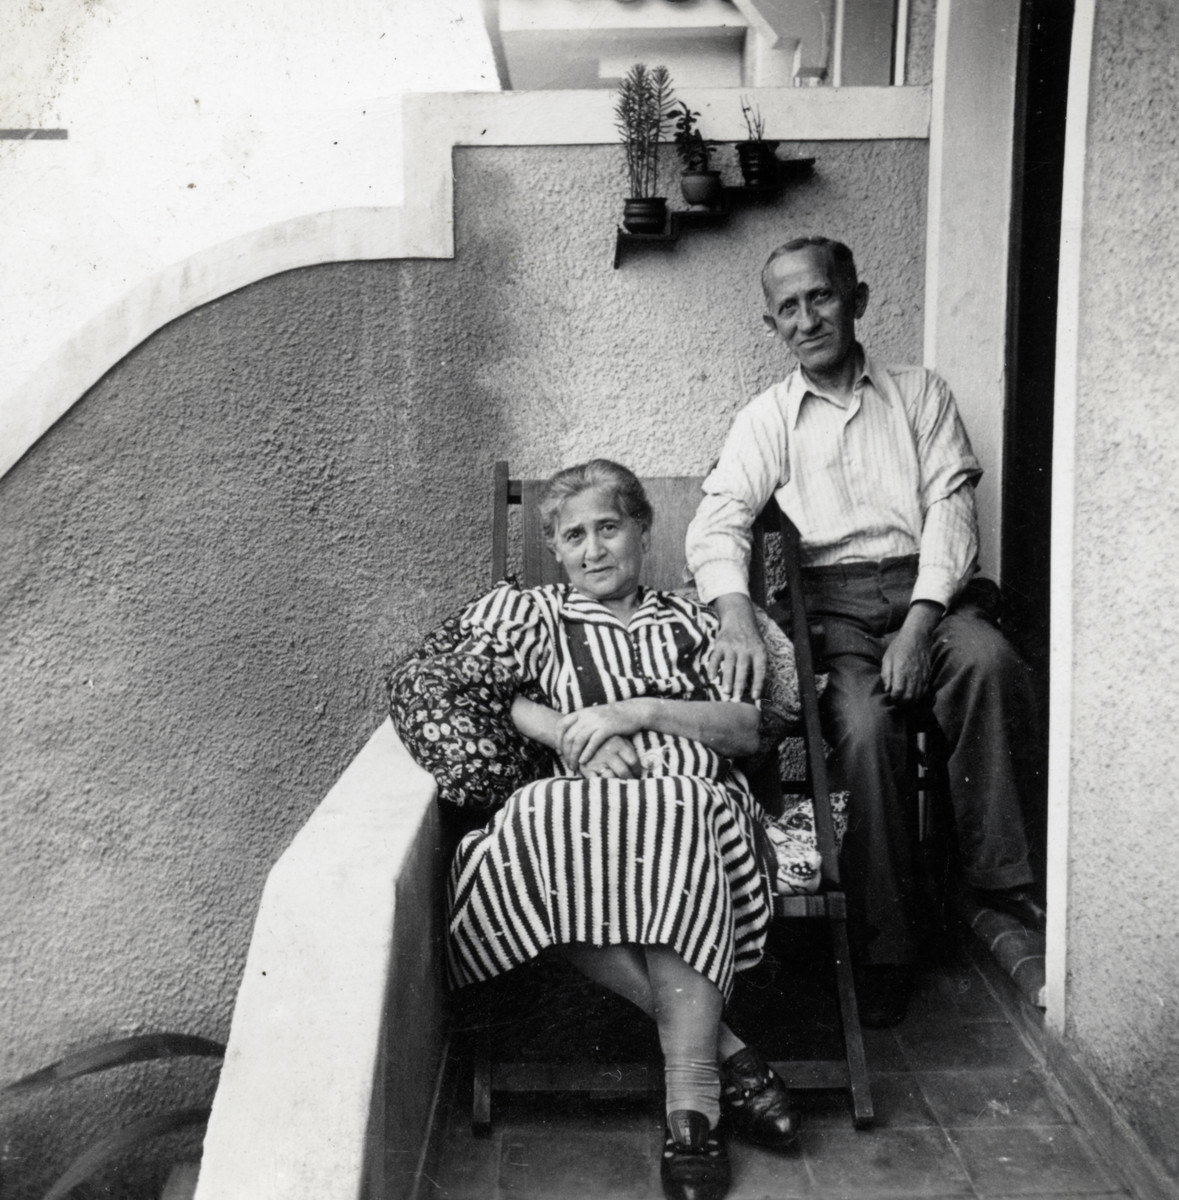 Zvi's maternal grandparents, Mr. and Mrs. Izaak Weissbrod, pose on their porch after immigrating to Brazil.